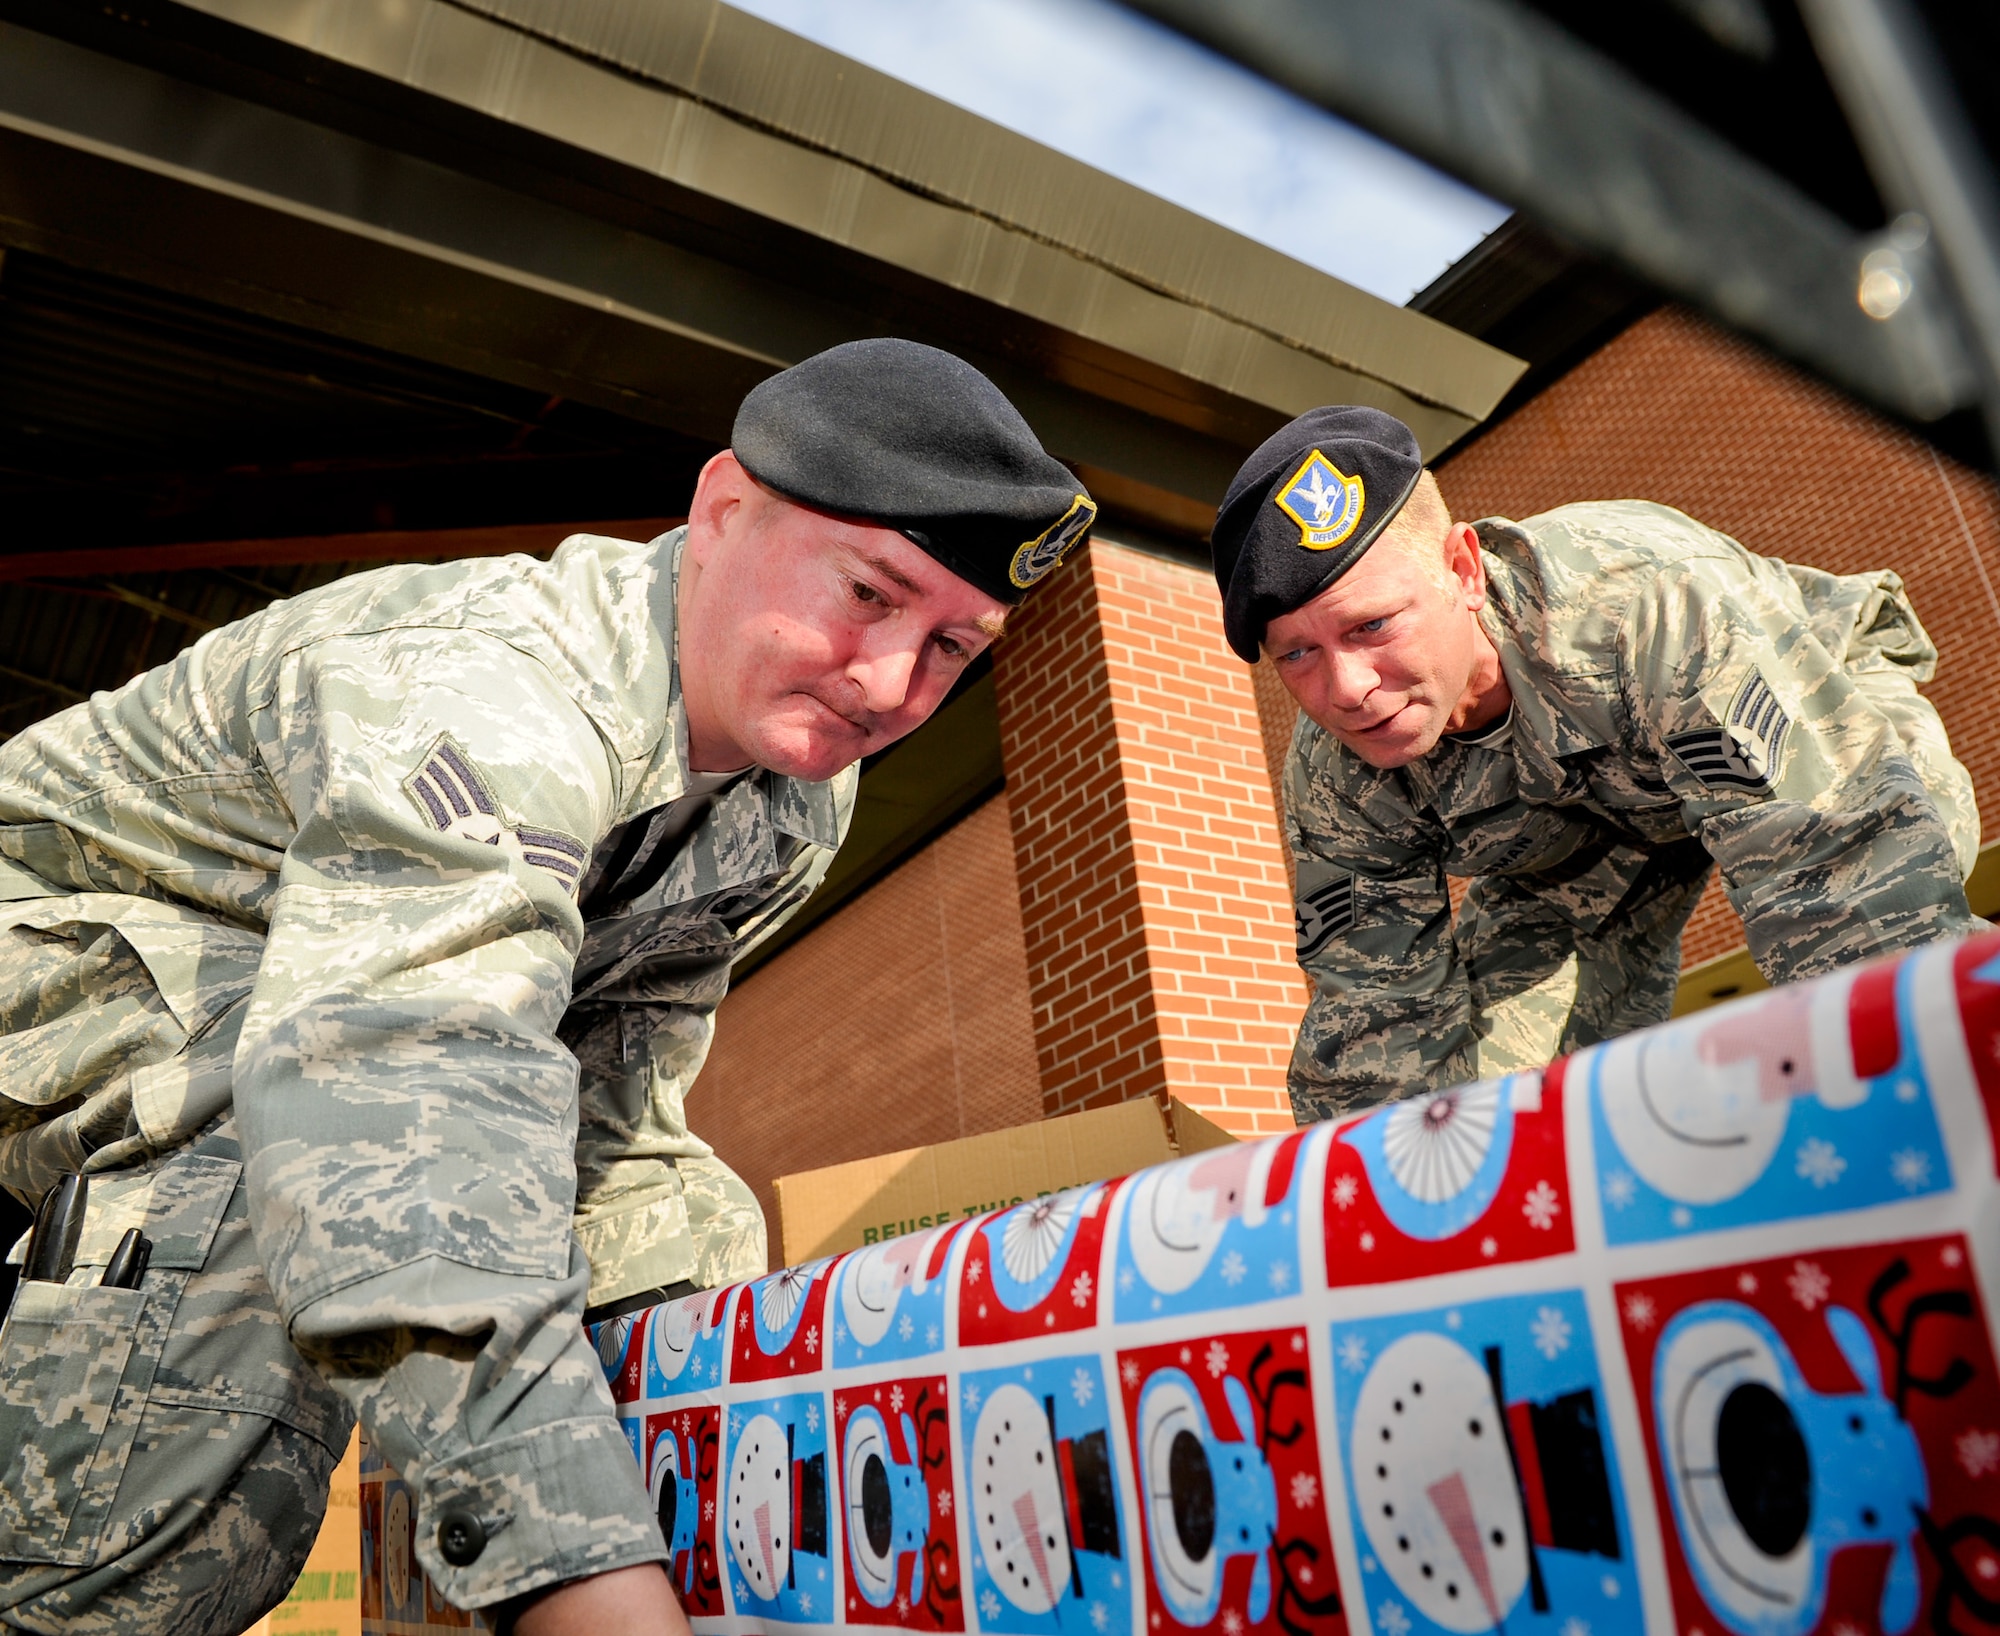 Senior Airman Aaron Wray, left, and Staff Sgt. Robert Gassman, 116th Security Forces Squadron, load a truck with presents donated for the Family-2-Family project, Robins Air Force Base, Ga., Dec. 9, 2011.  The annual project, coordinated by the 116th and 461st Air Control Wings, provides food and toys to community and military families for the holidays.  (National Guard photo by Master Sgt. Roger Parsons/Released)